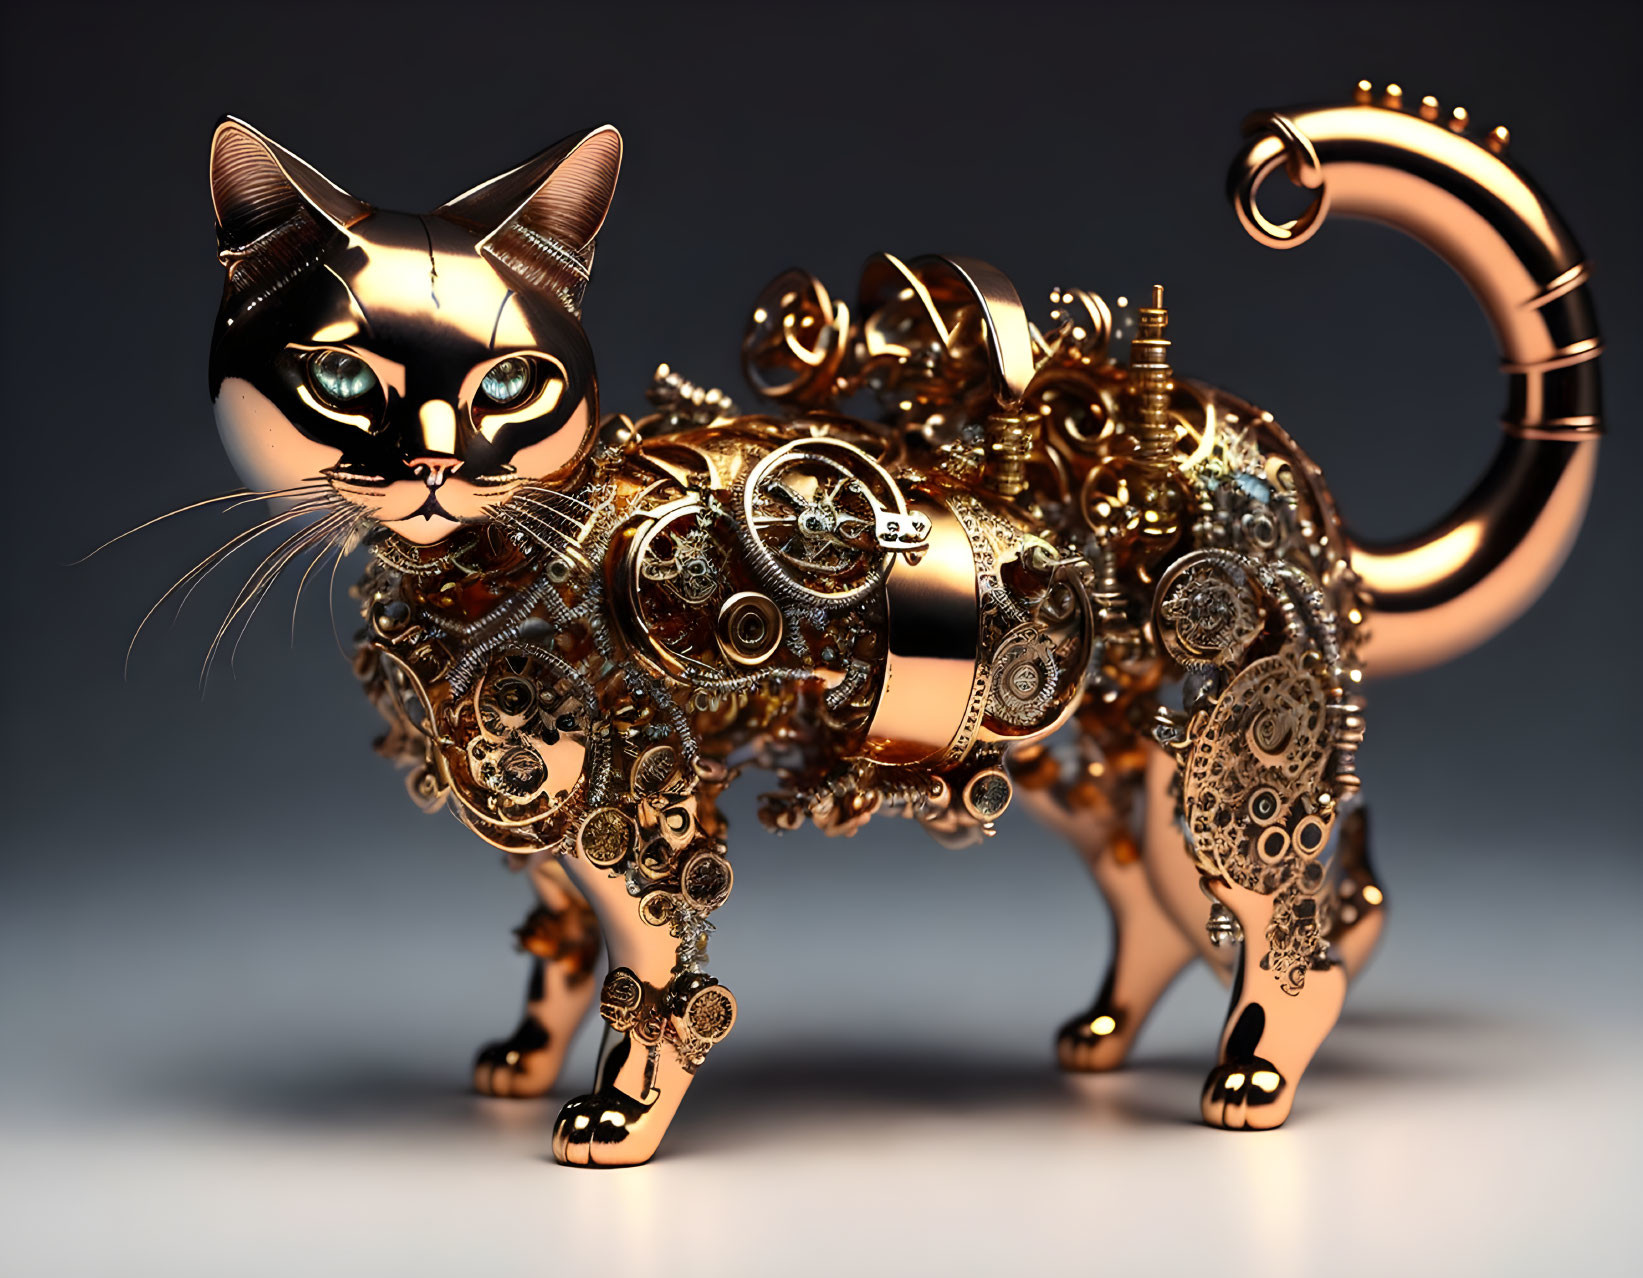 Metallic Steampunk Cat Sculpture with Gold and Silver Gears